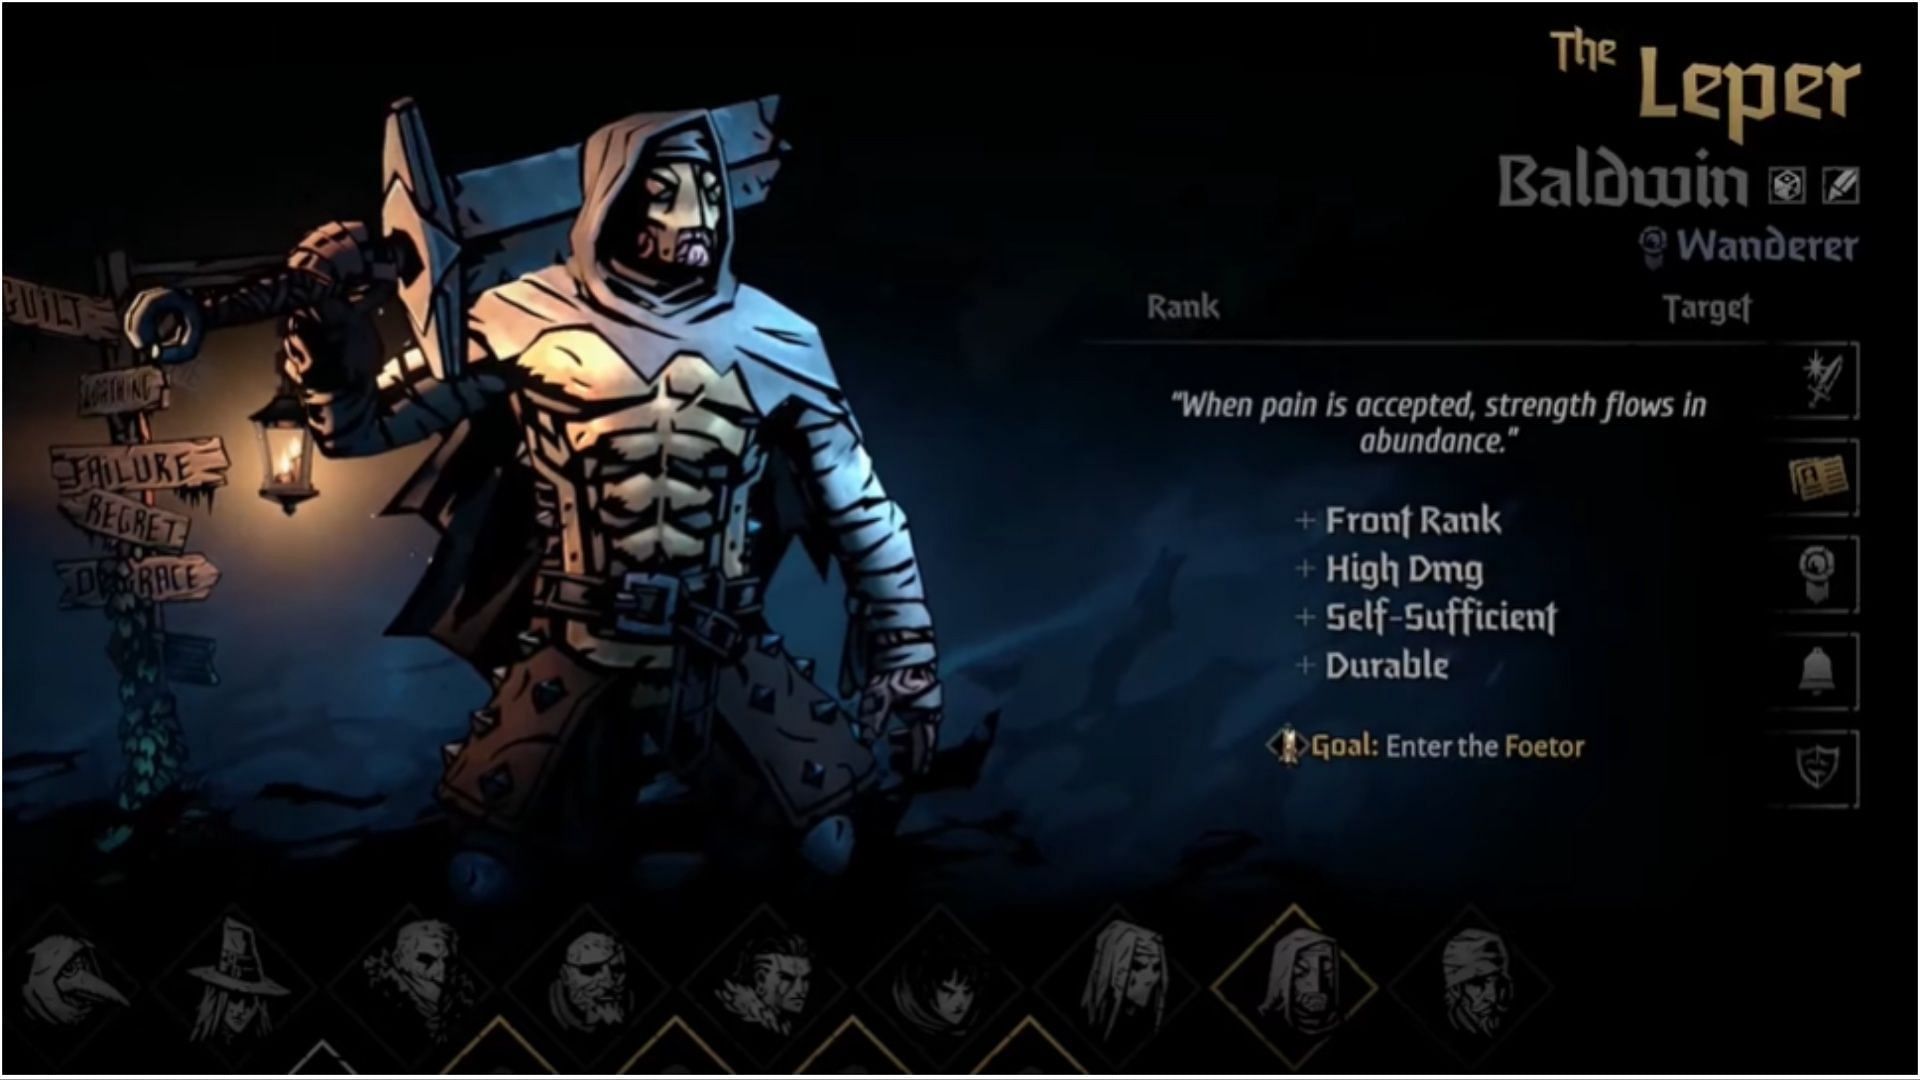 Leper stands out as a powerful force in Darkest Dungeon 2